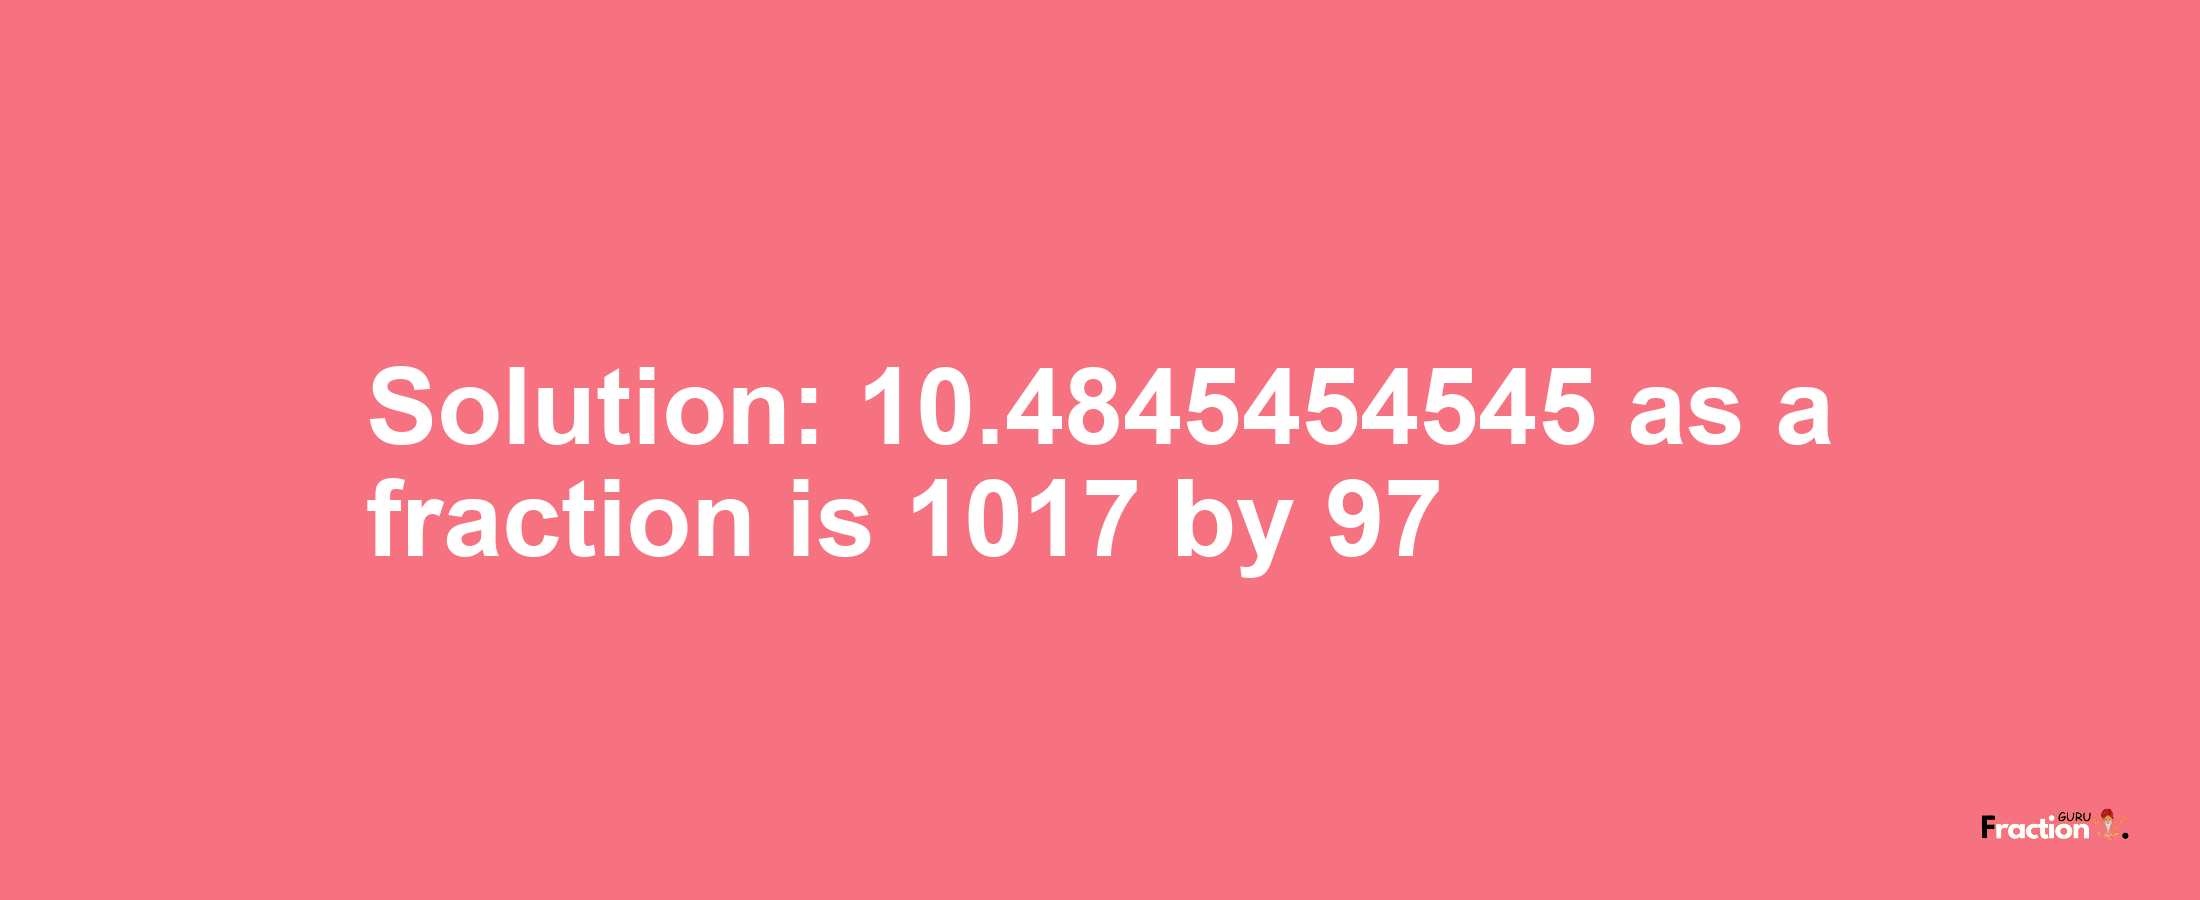 Solution:10.4845454545 as a fraction is 1017/97